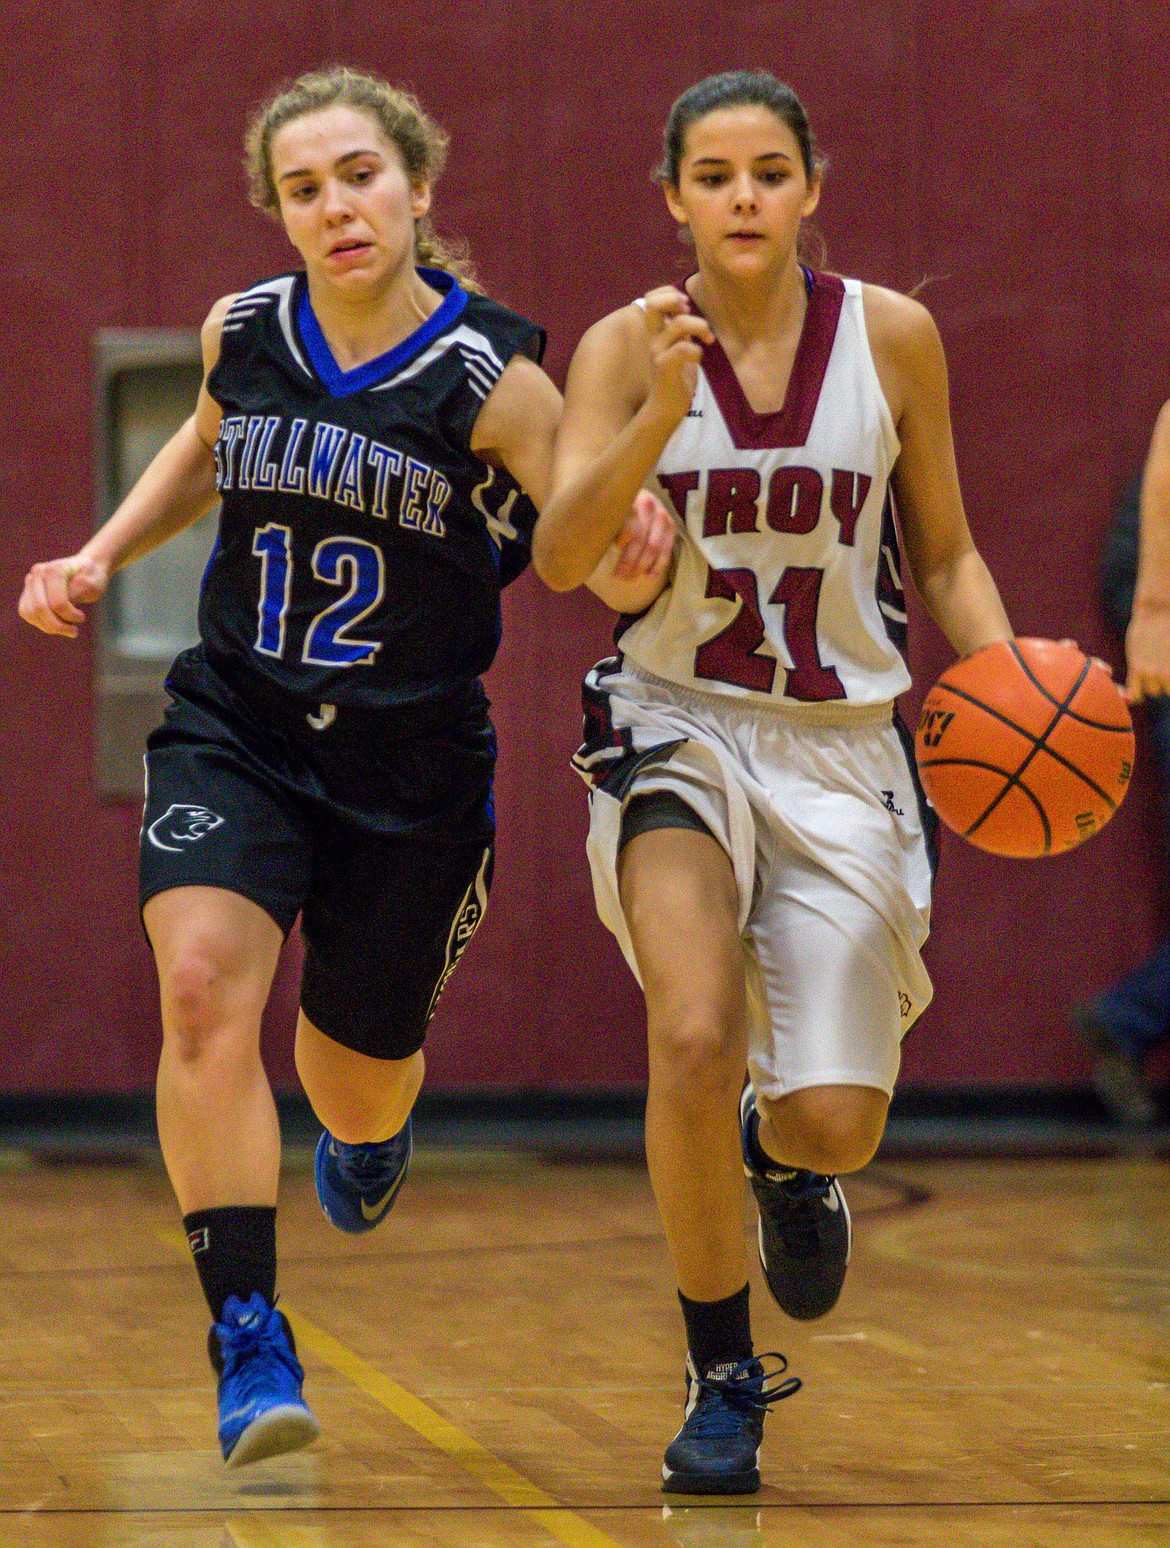 Stillwater&#146;s Cora Boll, left, tries to get control of the ball from Troy&#146;s Talise Becquart on Tuesday in Troy. (John Blodgett/The Western News)